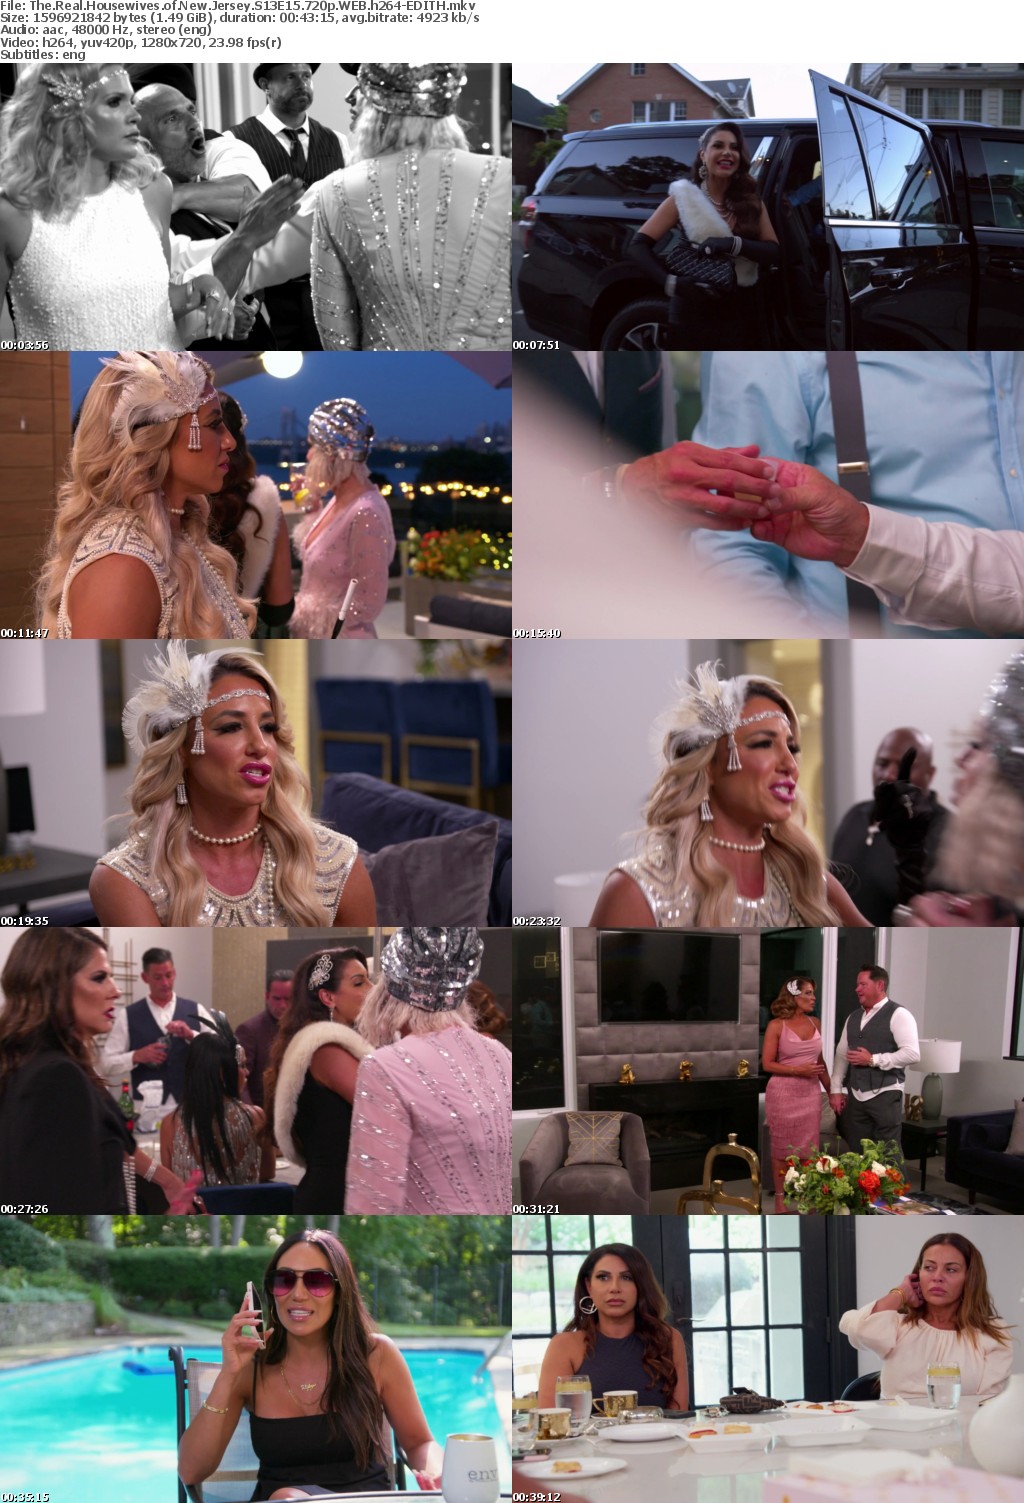 The Real Housewives of New Jersey S13E15 720p WEB h264-EDITH